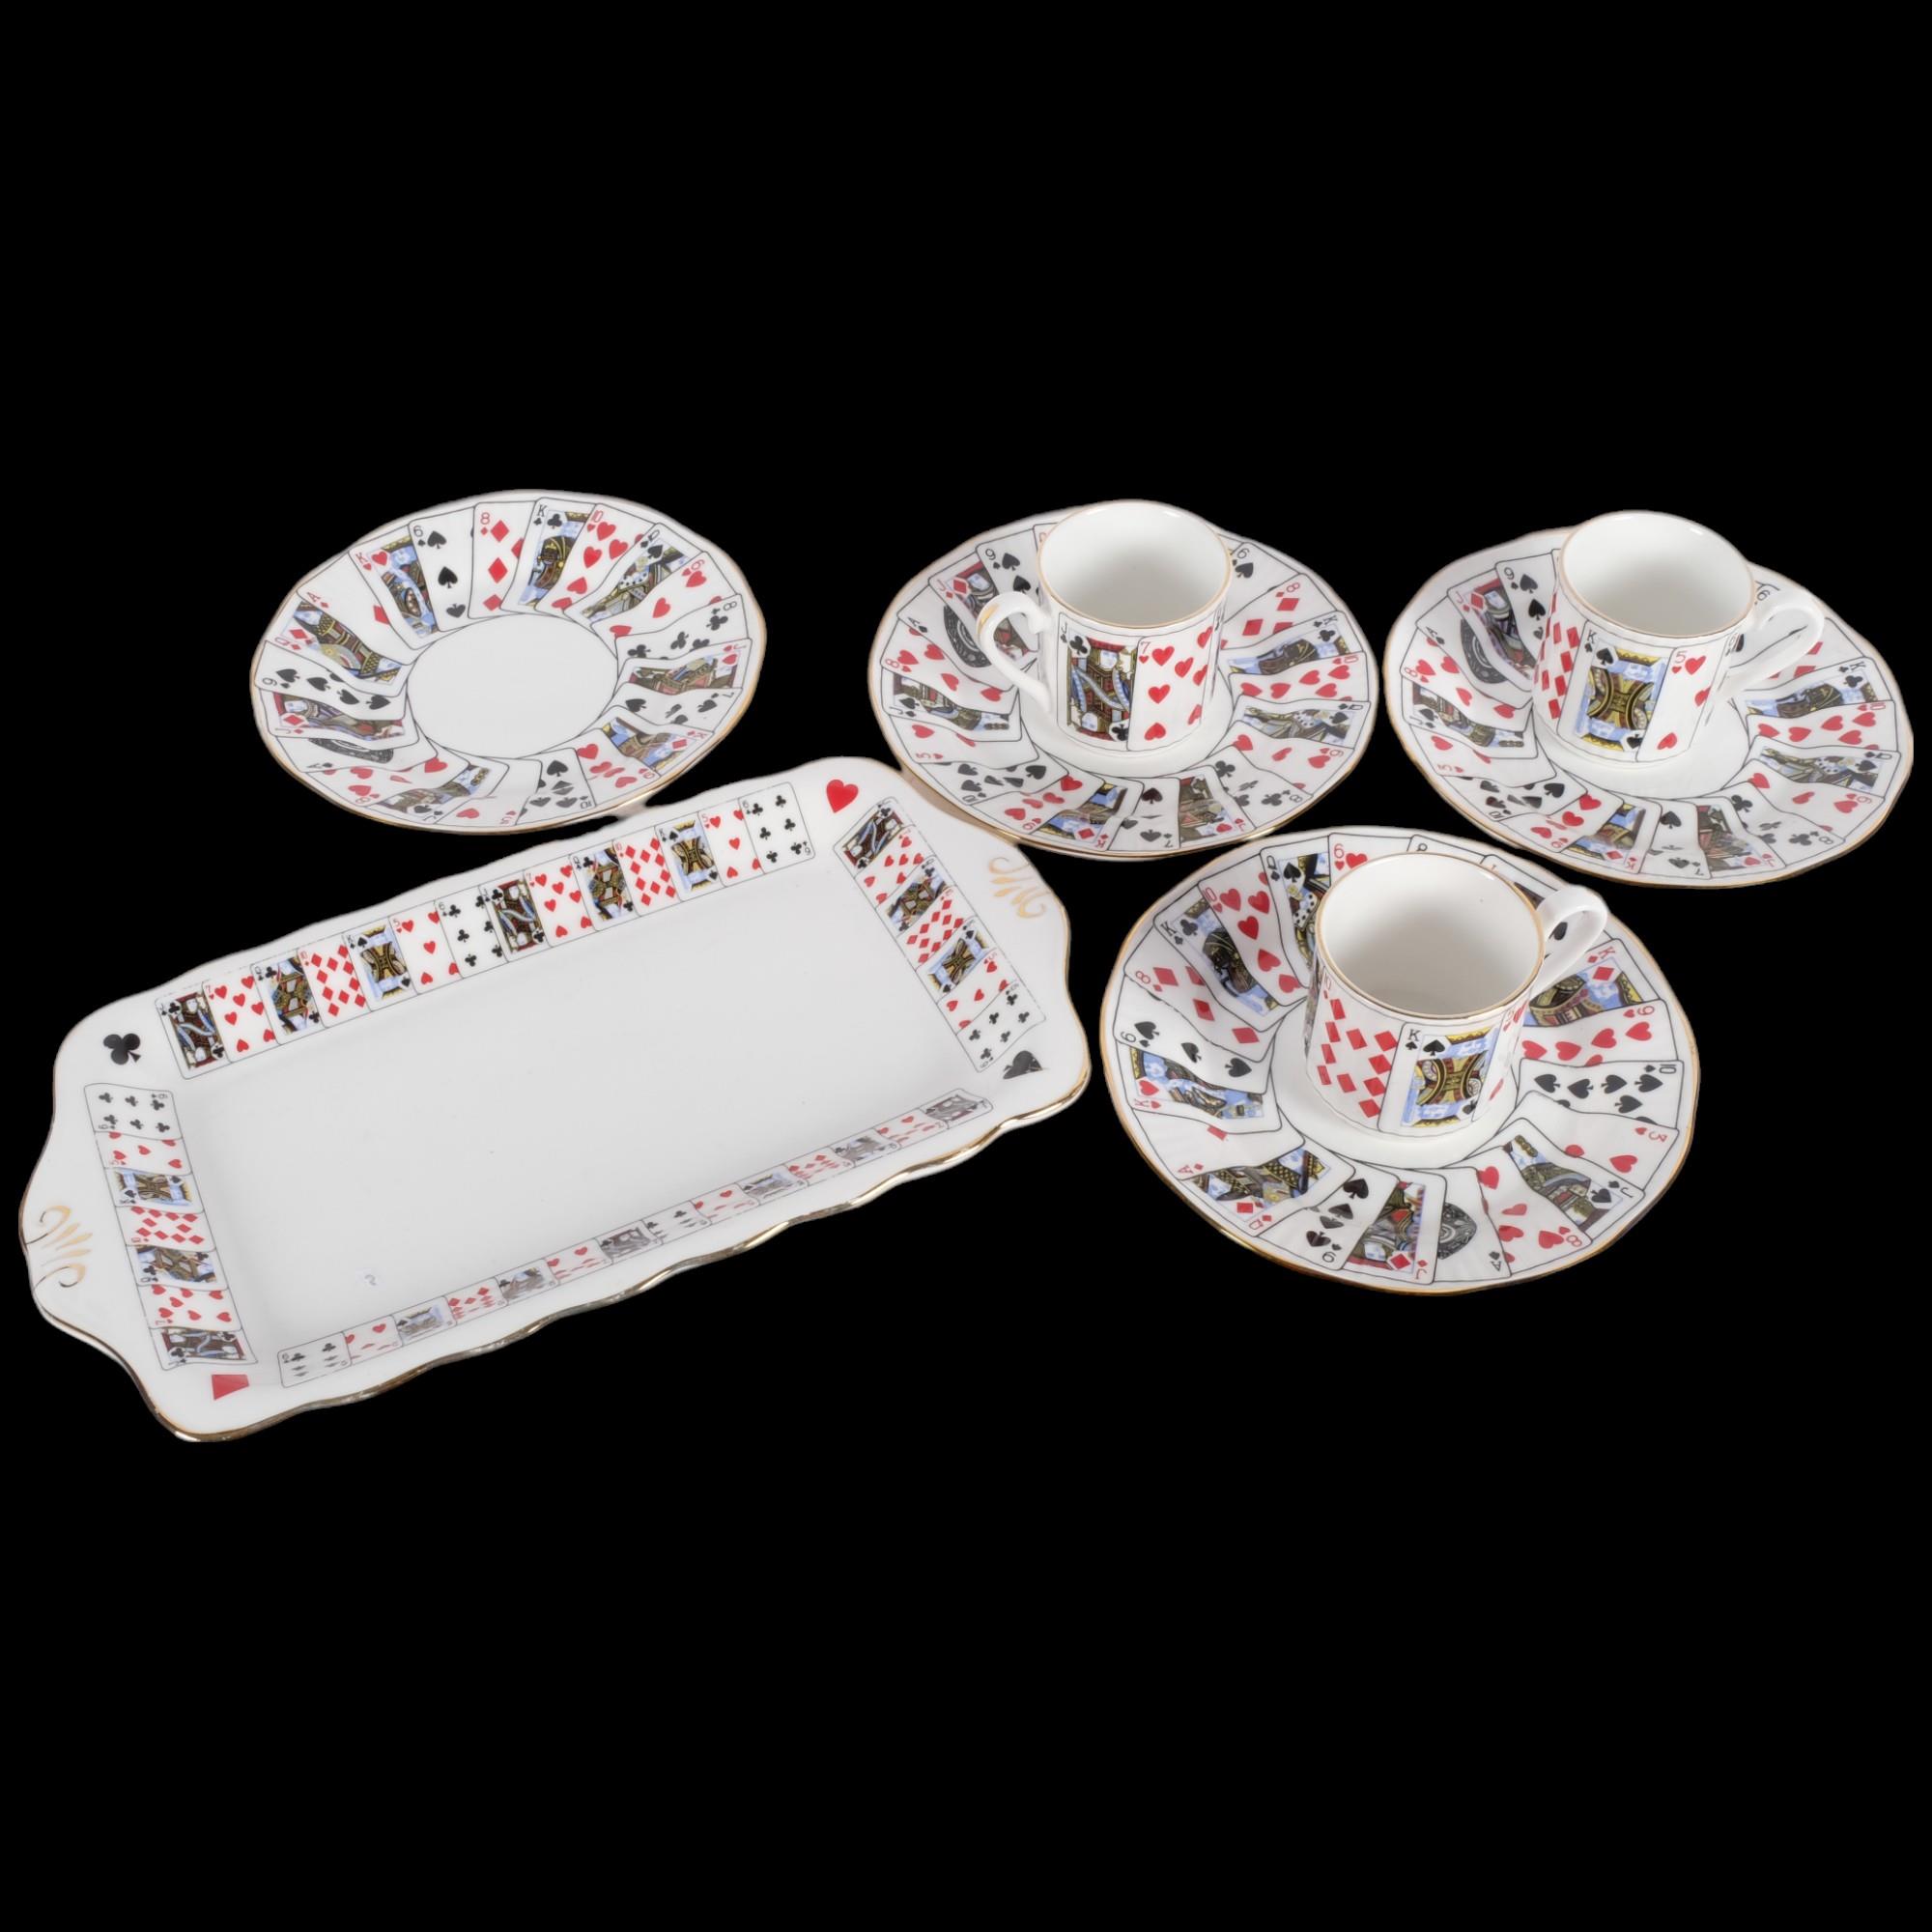 Elizabethan china "cut for coffee" cards design saucers and matching coffee cans, and a sandwich - Image 2 of 3